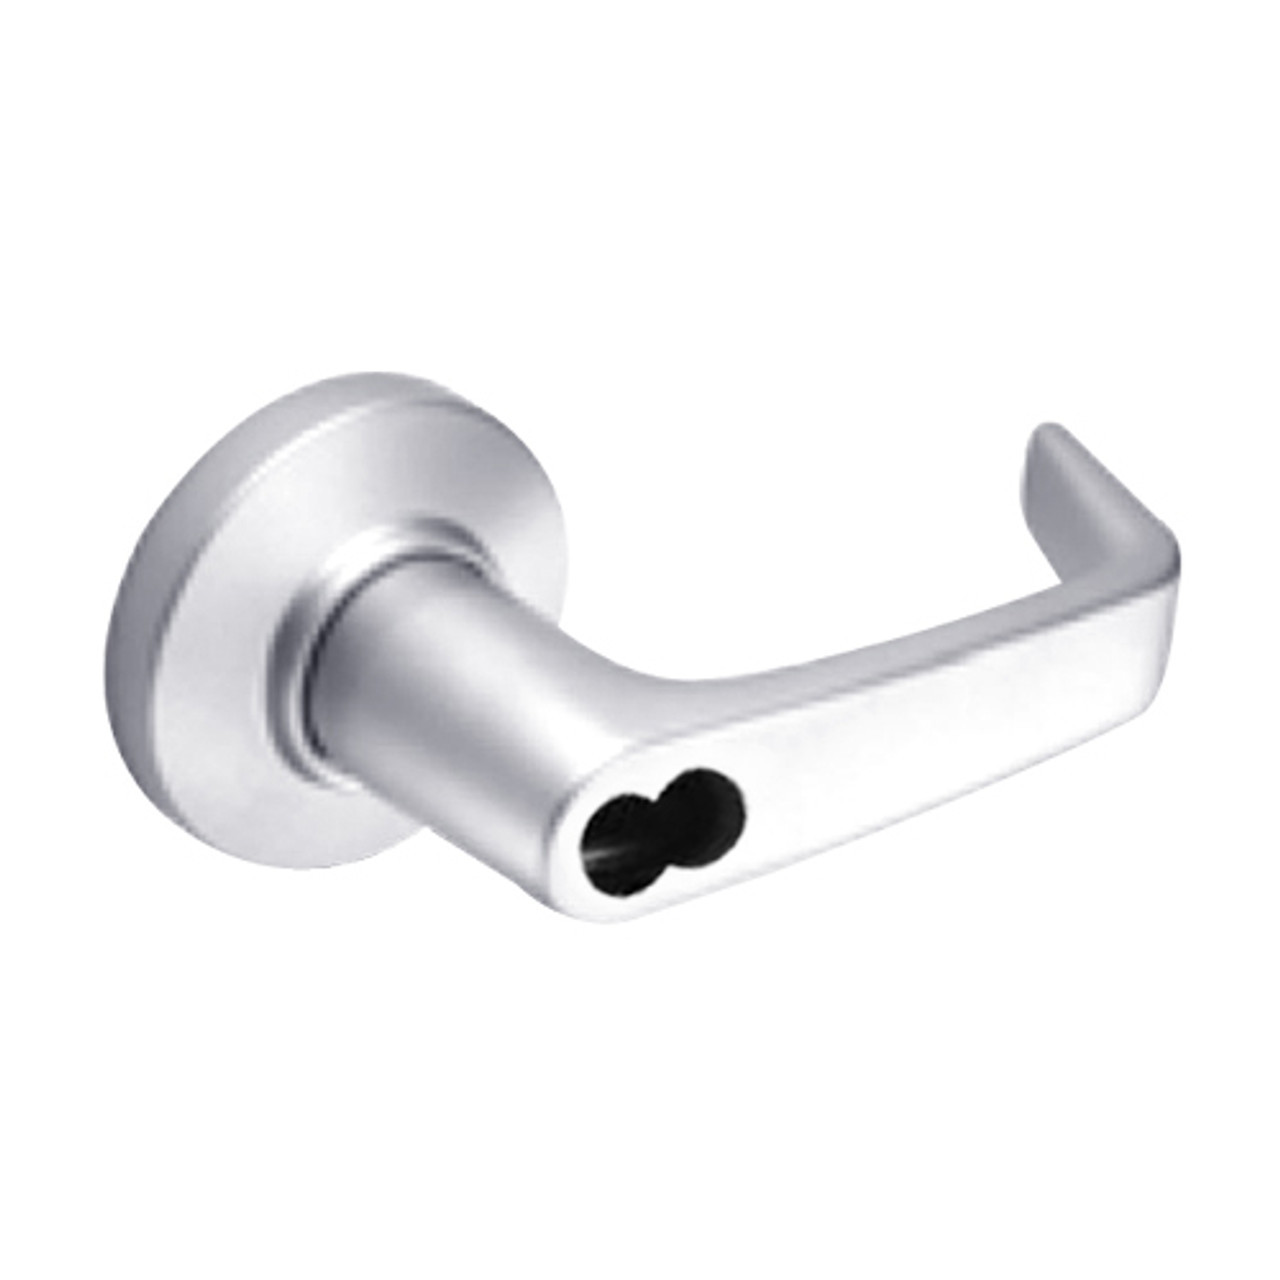 9K37A15CSTK625LM Best 9K Series Dormitory or Storeroom Cylindrical Lever Locks with Contour Angle with Return Lever Design Accept 7 Pin Best Core in Bright Chrome